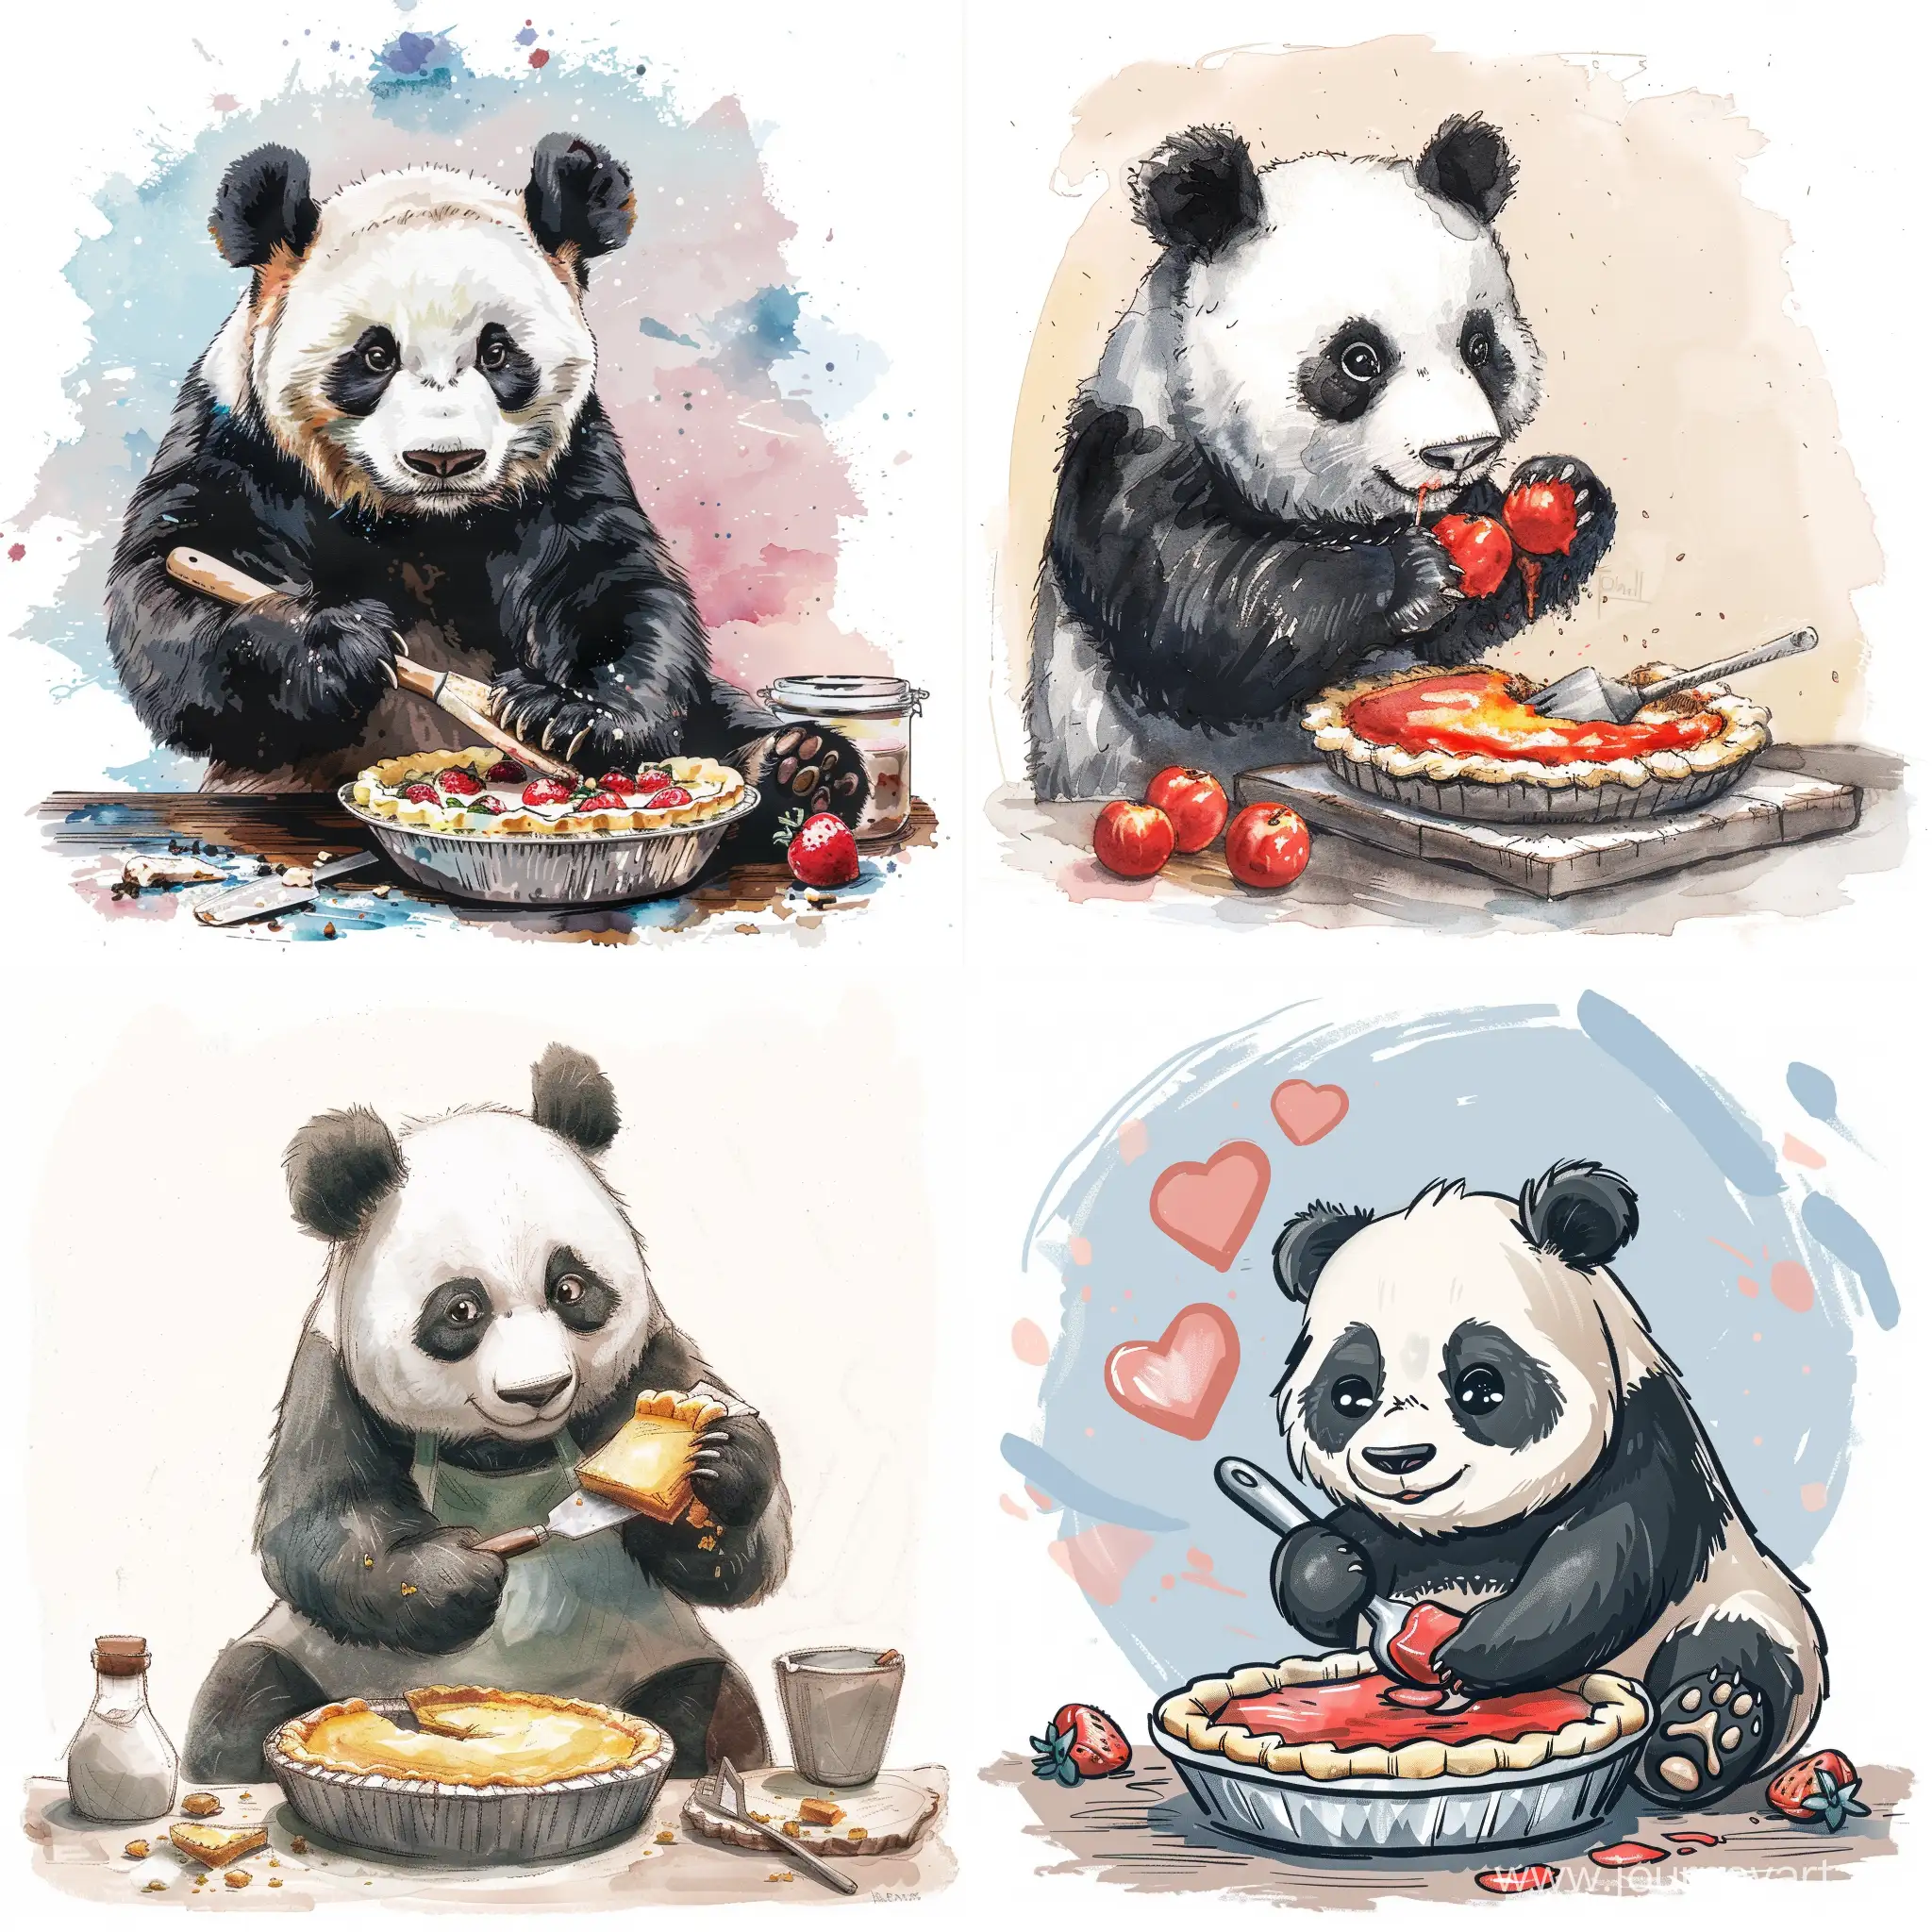 Adorable-Pandas-Baking-a-Sweet-Pie-Together